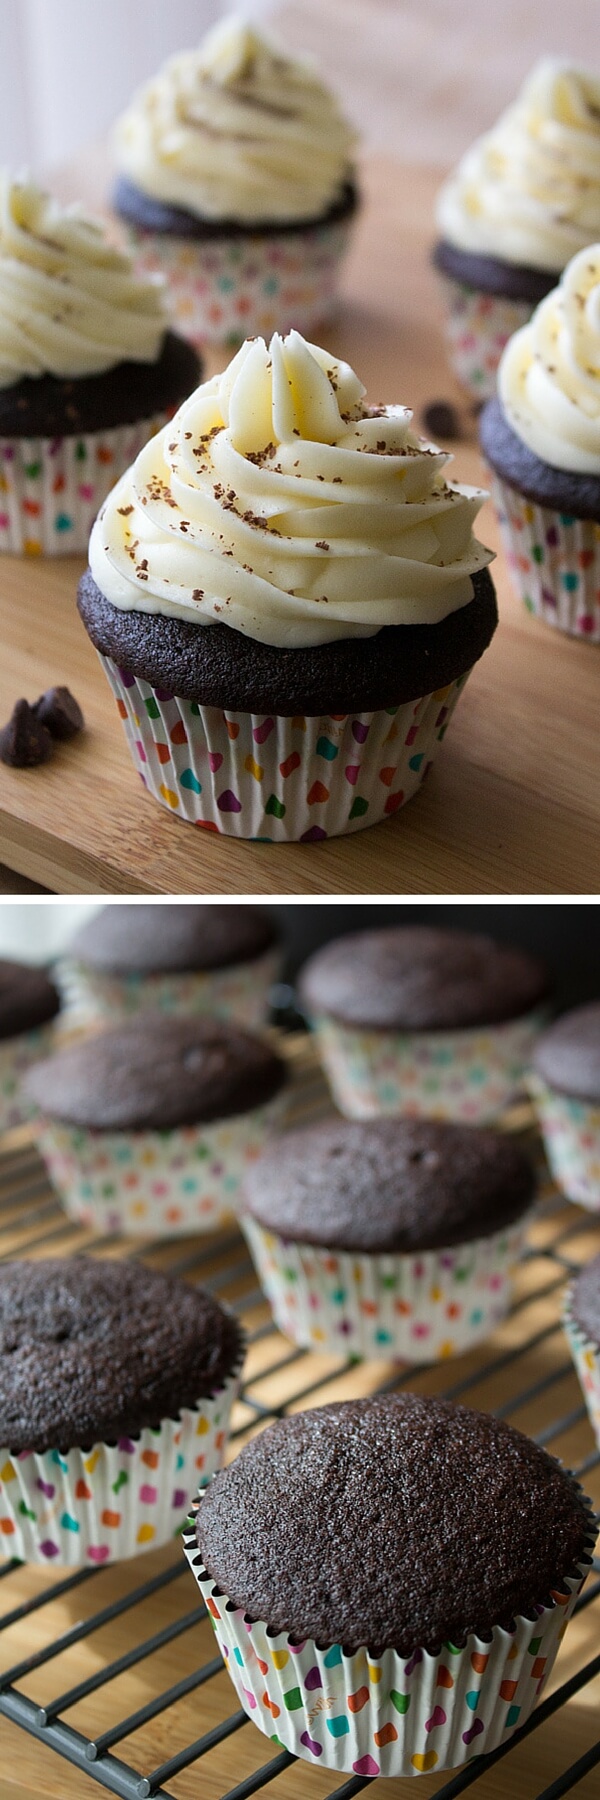 Chocolate Cupcakes with Cream Cheese Frosting. Super moist chocolate cupcakes are made even better by frosting them with thick & creamy cream cheese buttercream! www.justsotasty.com